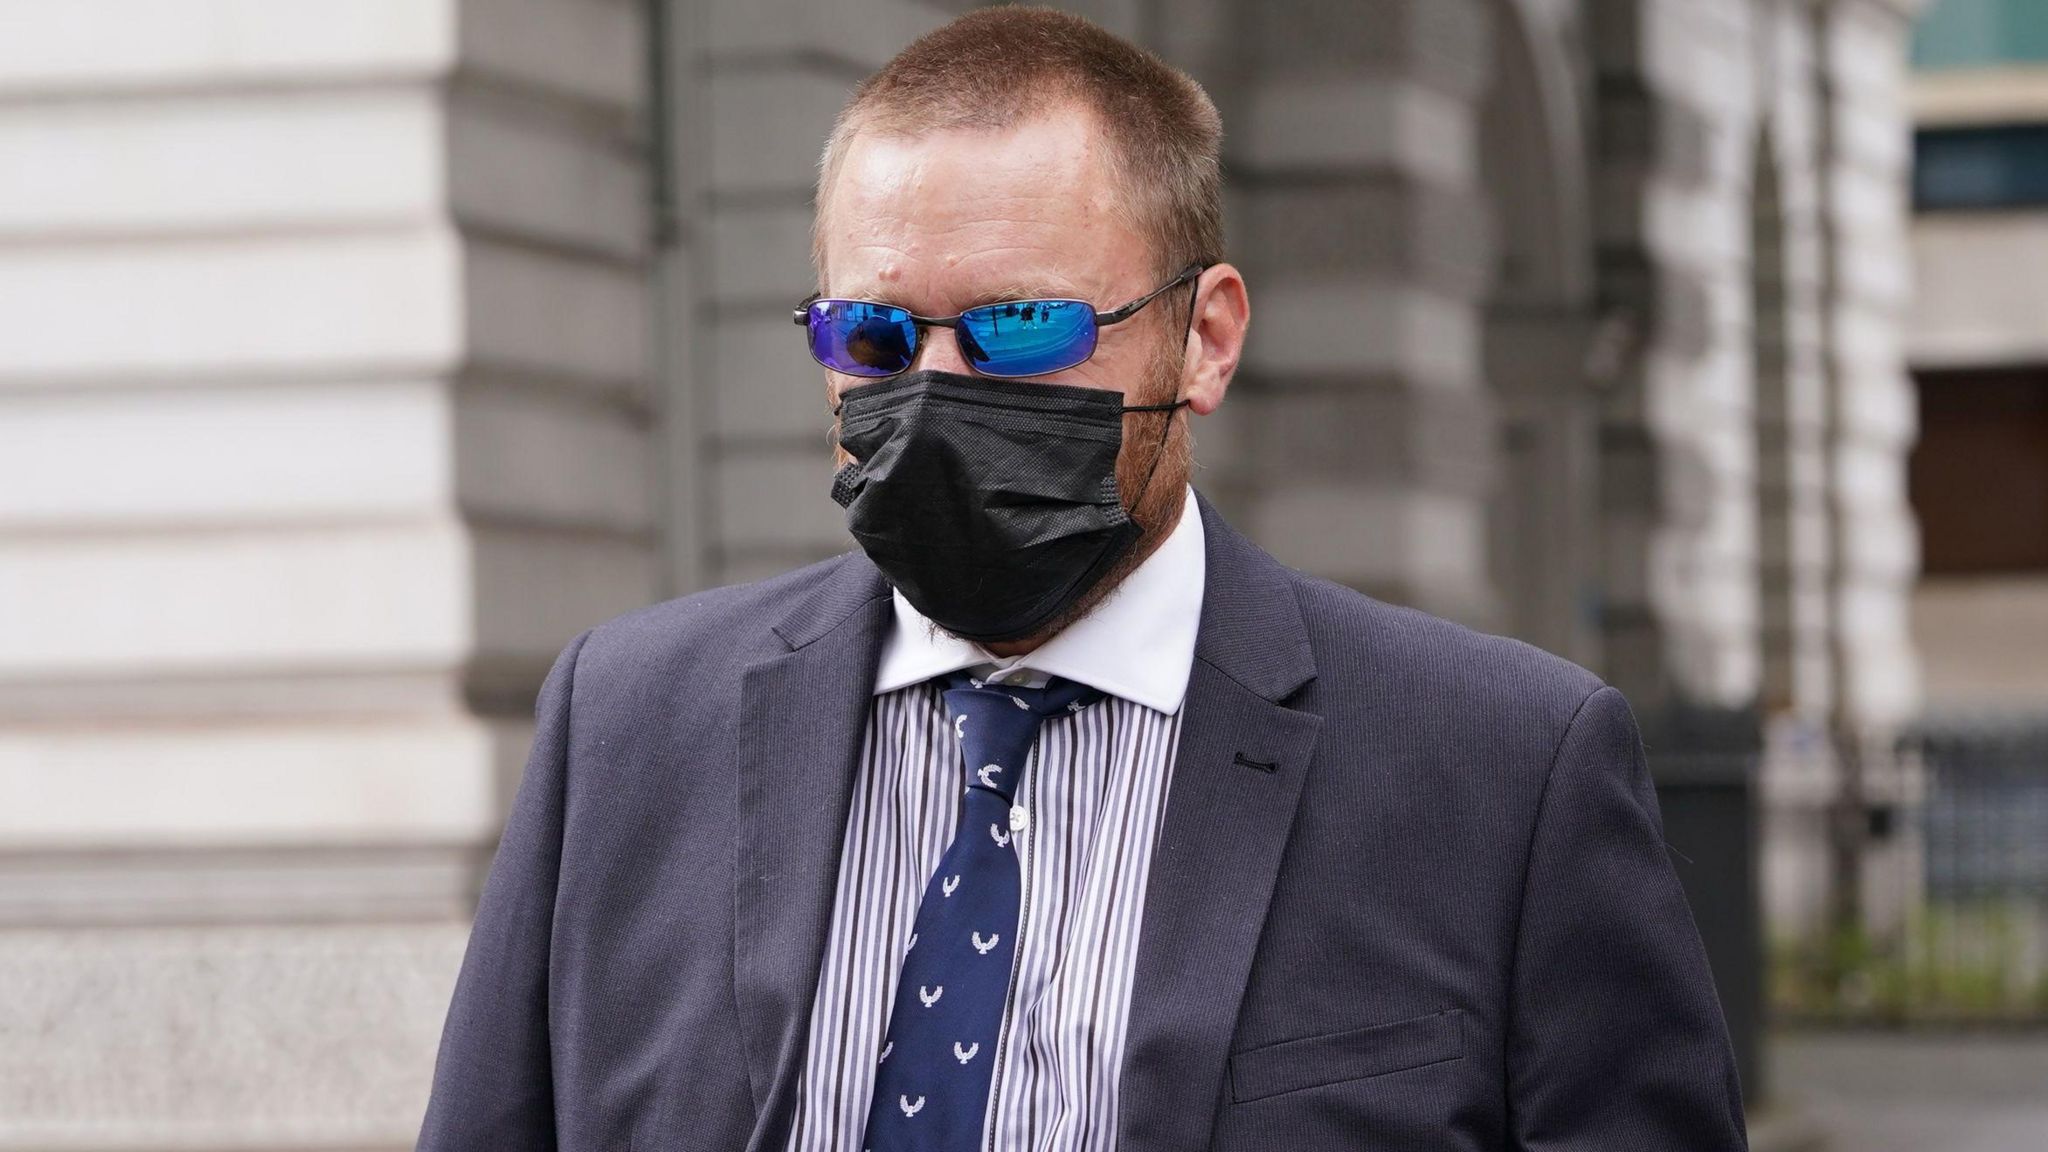 PC Craig Carter wearing a black face mask and sunglasses